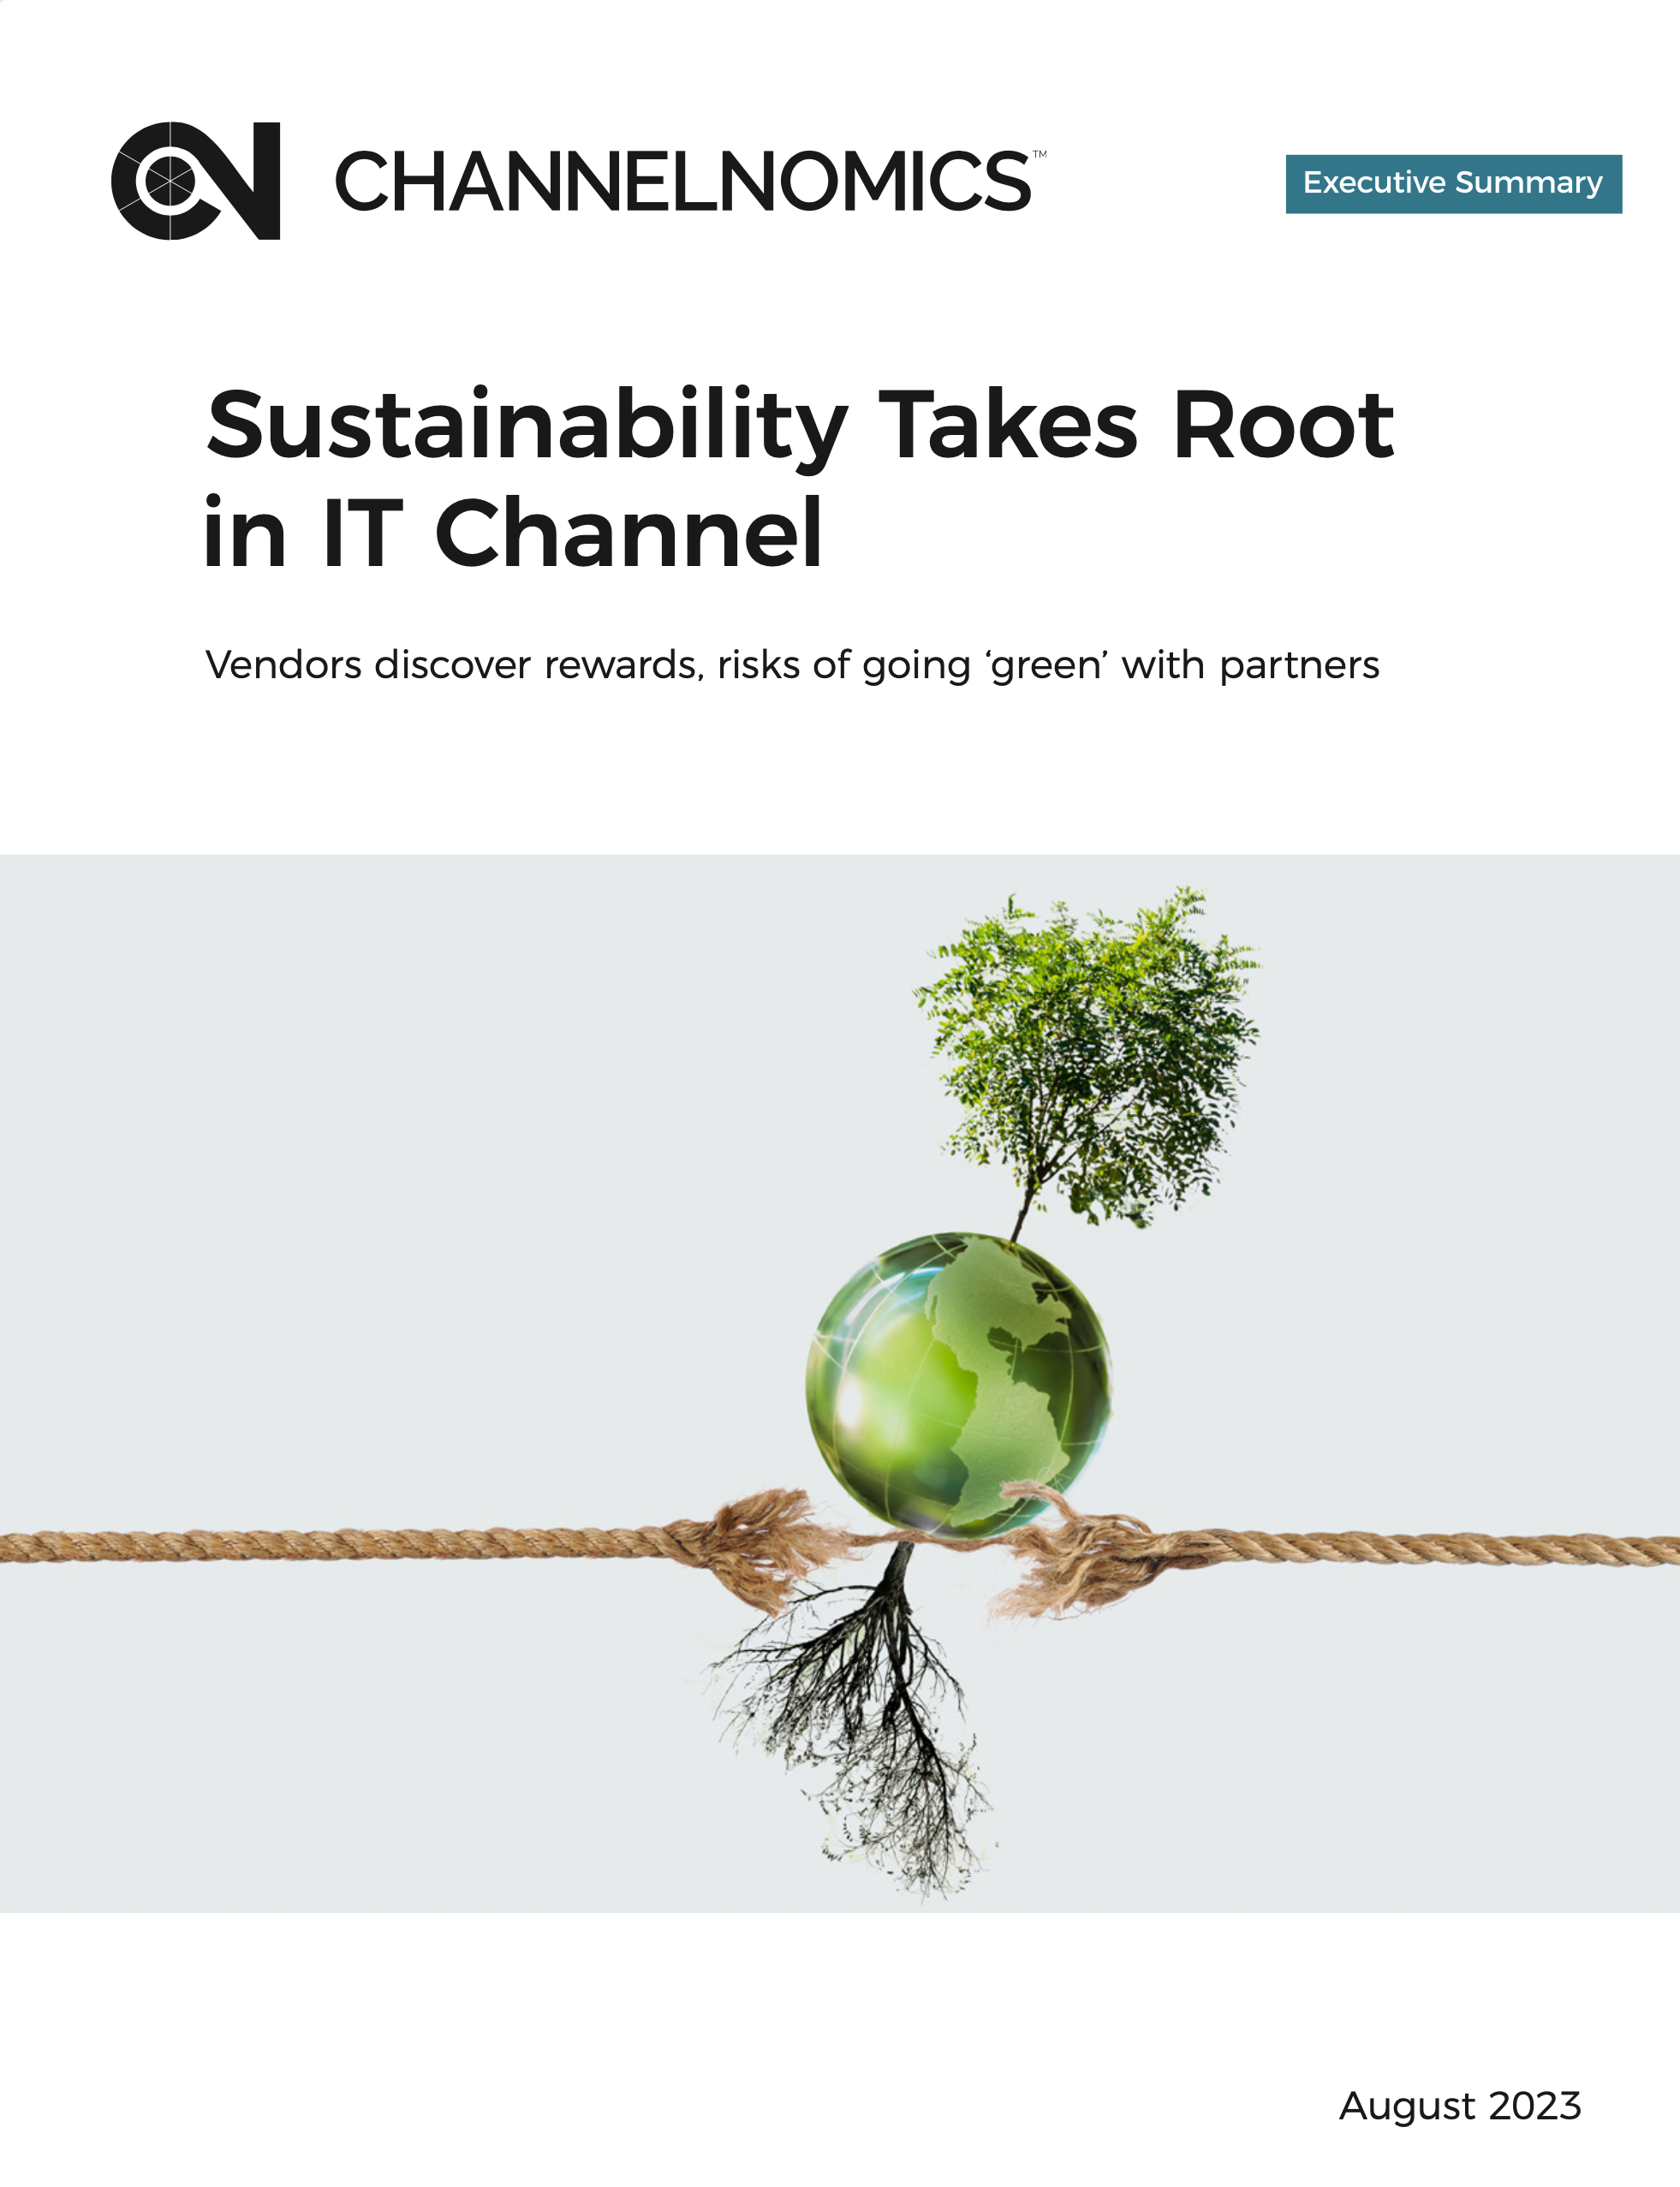 Sustainability Takes Root in IT Channel